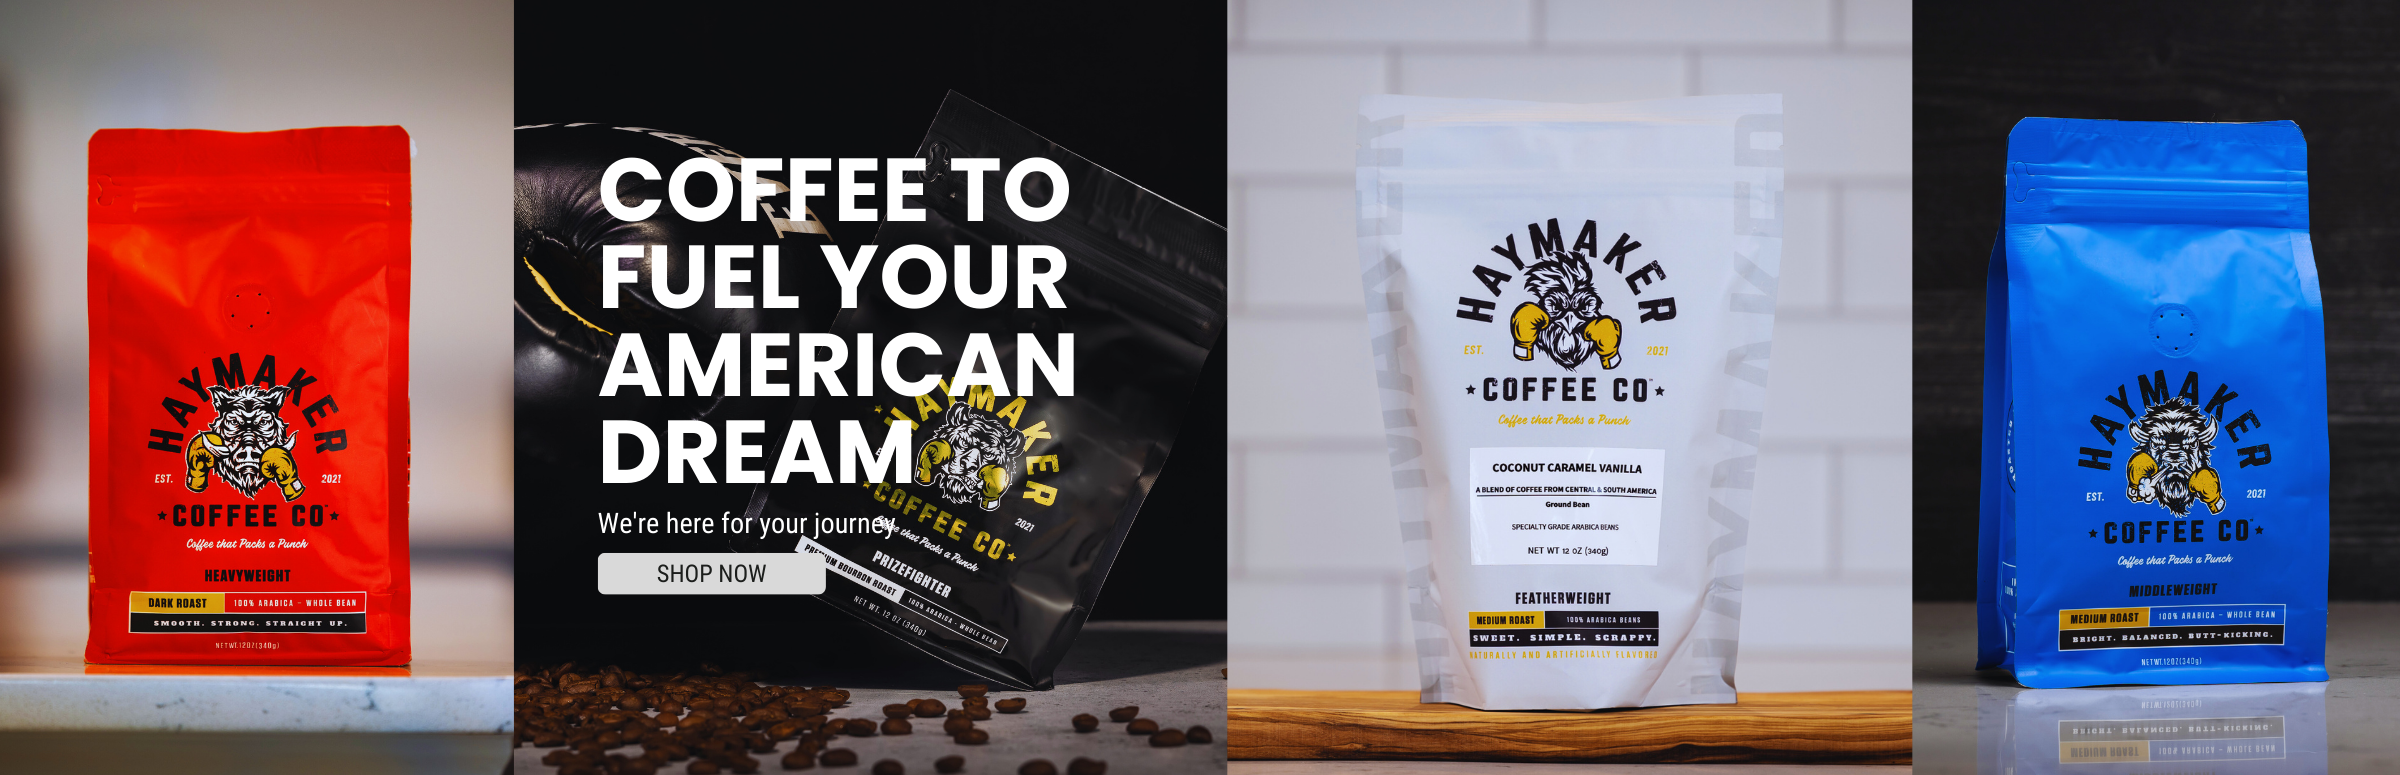 Coffee to fuel your American dream